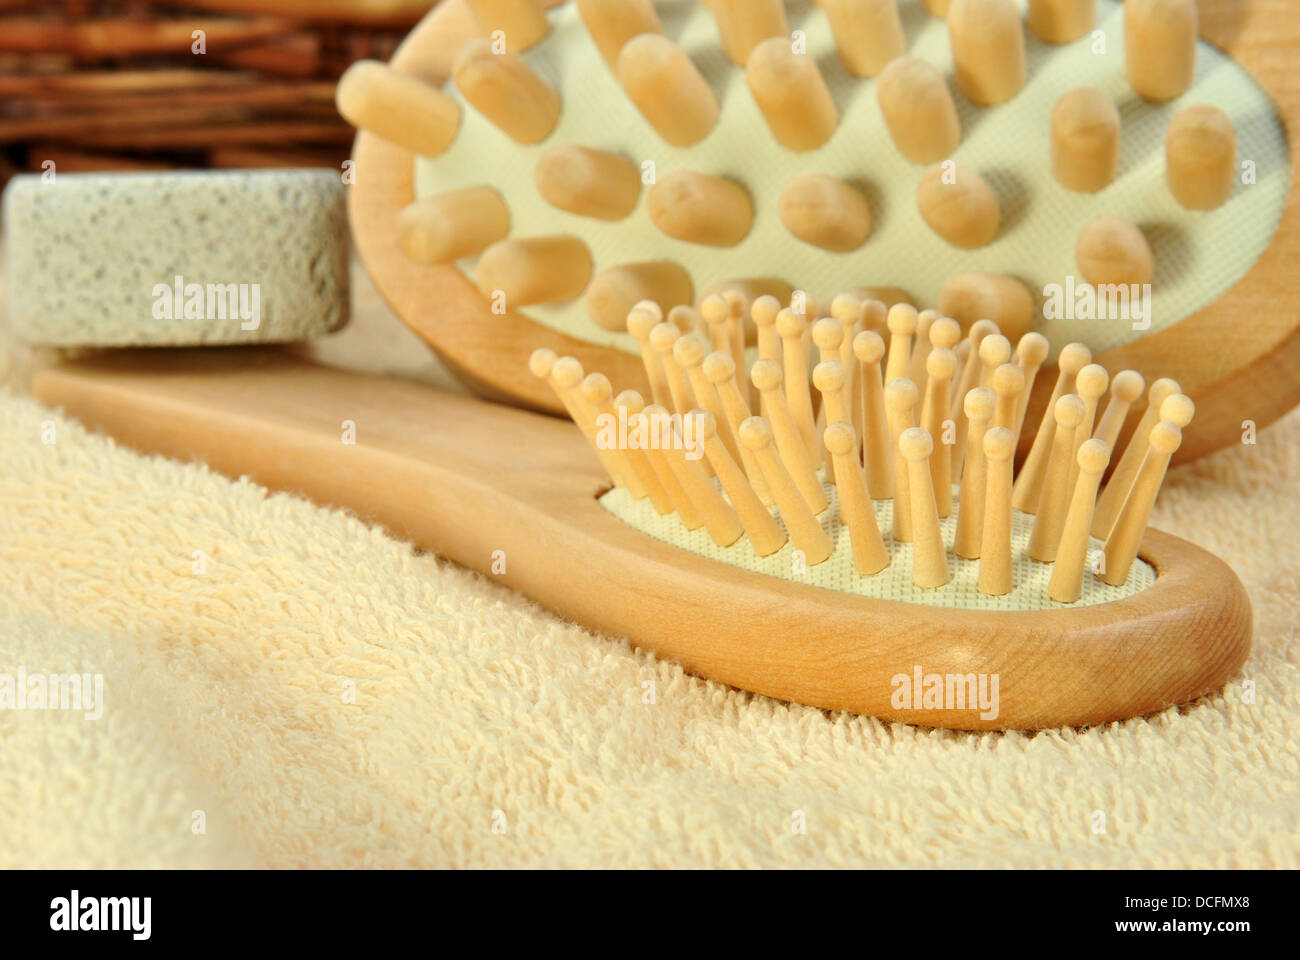 new hair brush on a terry cloth towel Stock Photo